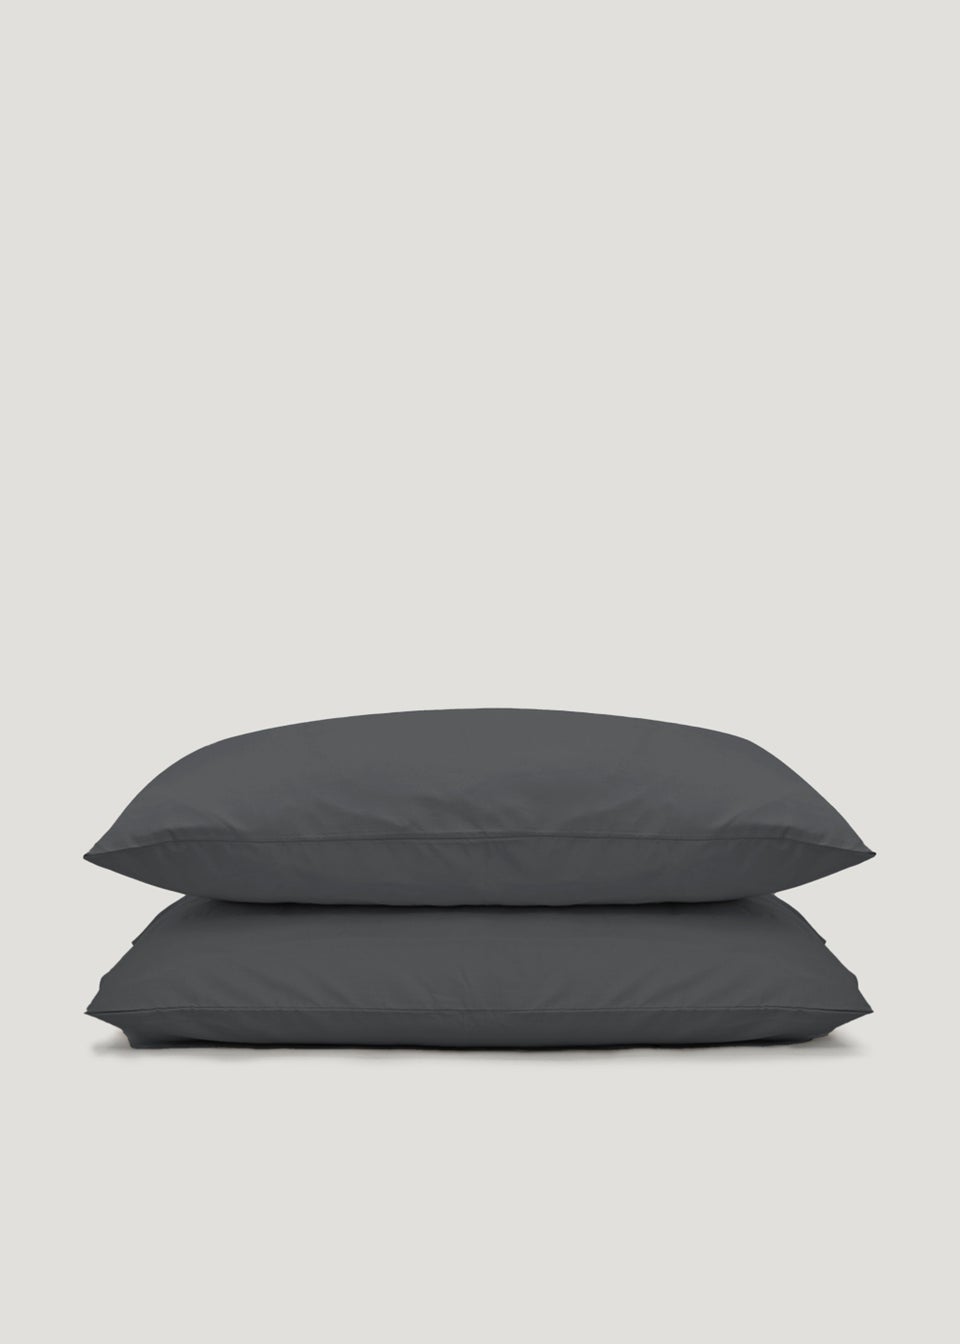 Charcoal Polycotton Housewife Pillowcase Pair (144 Thread Count)